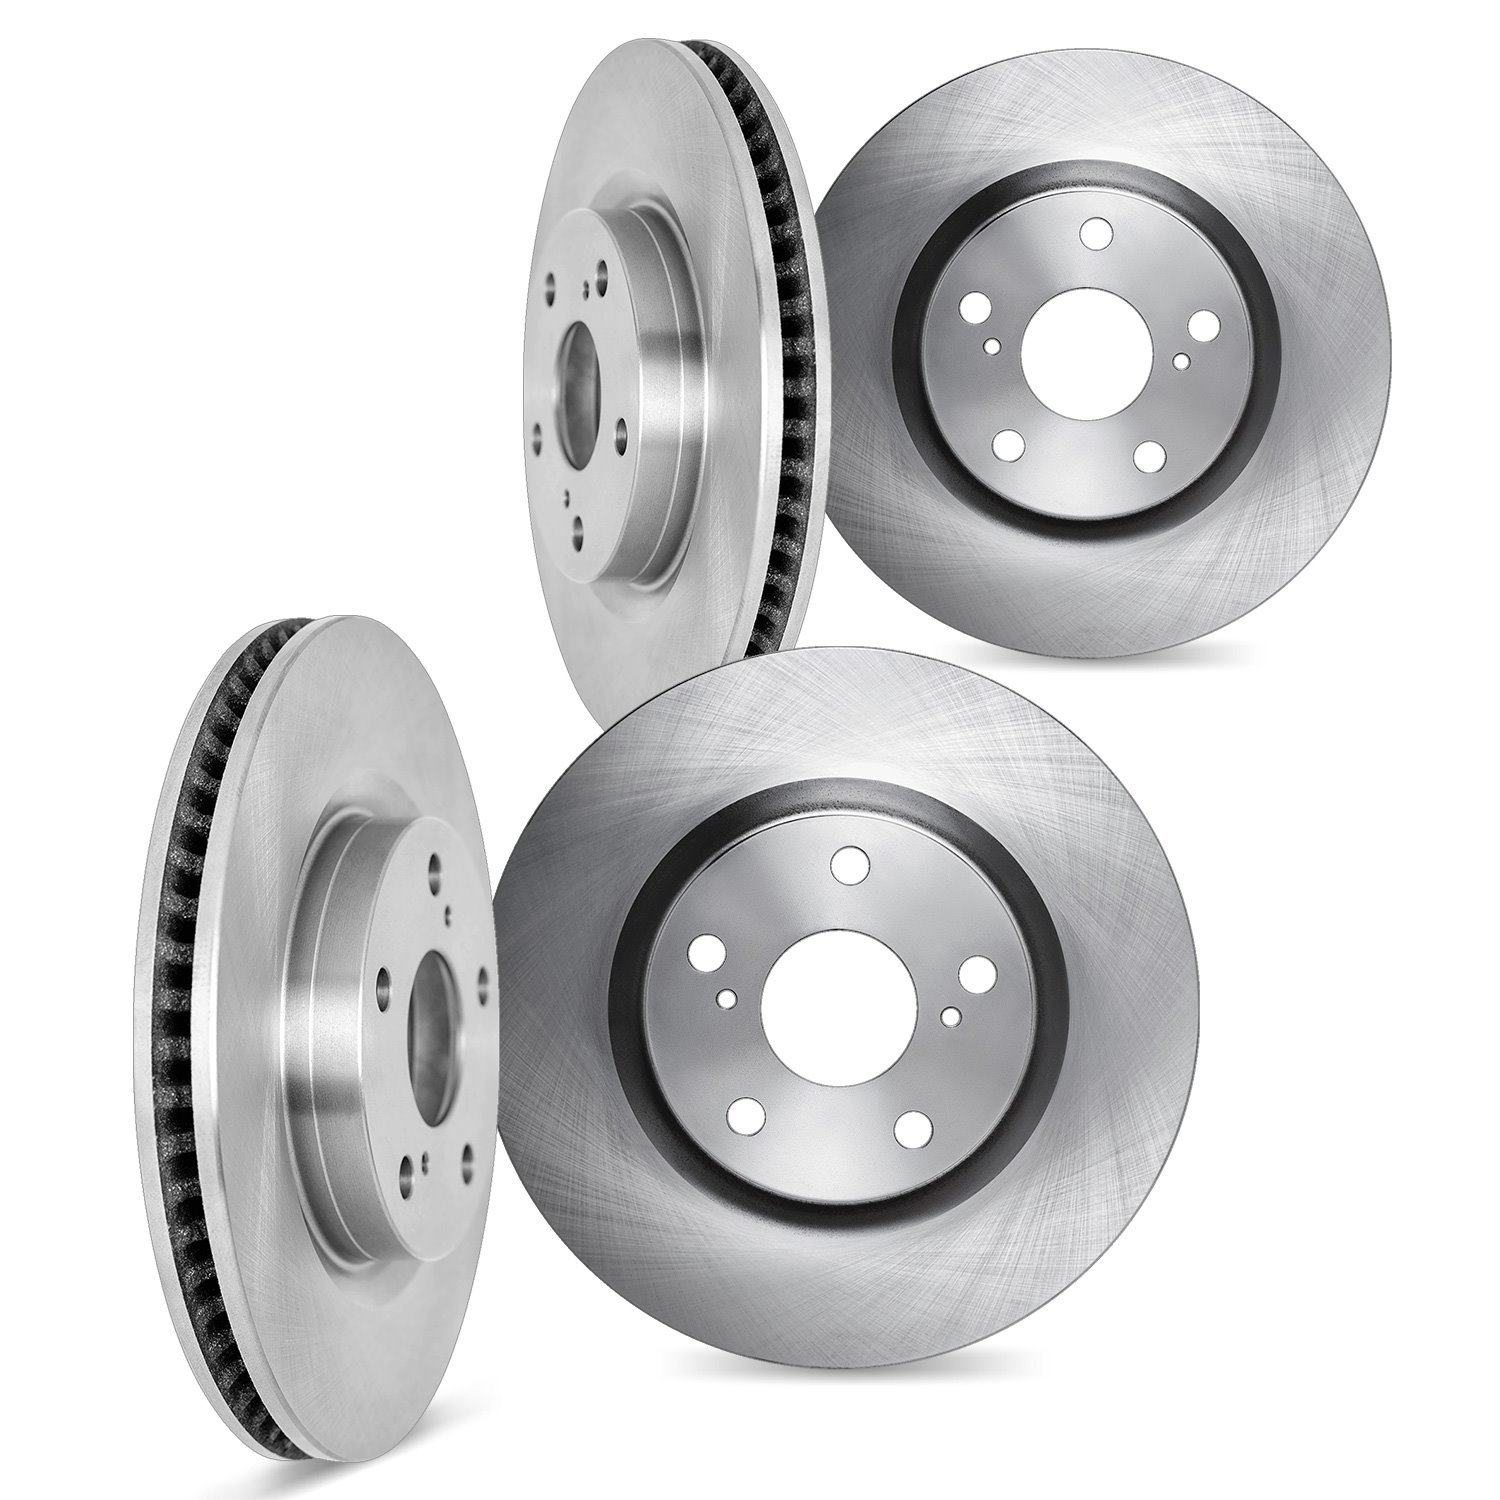 6004-67128 Brake Rotors, Fits Select Infiniti/Nissan, Position: Front and Rear